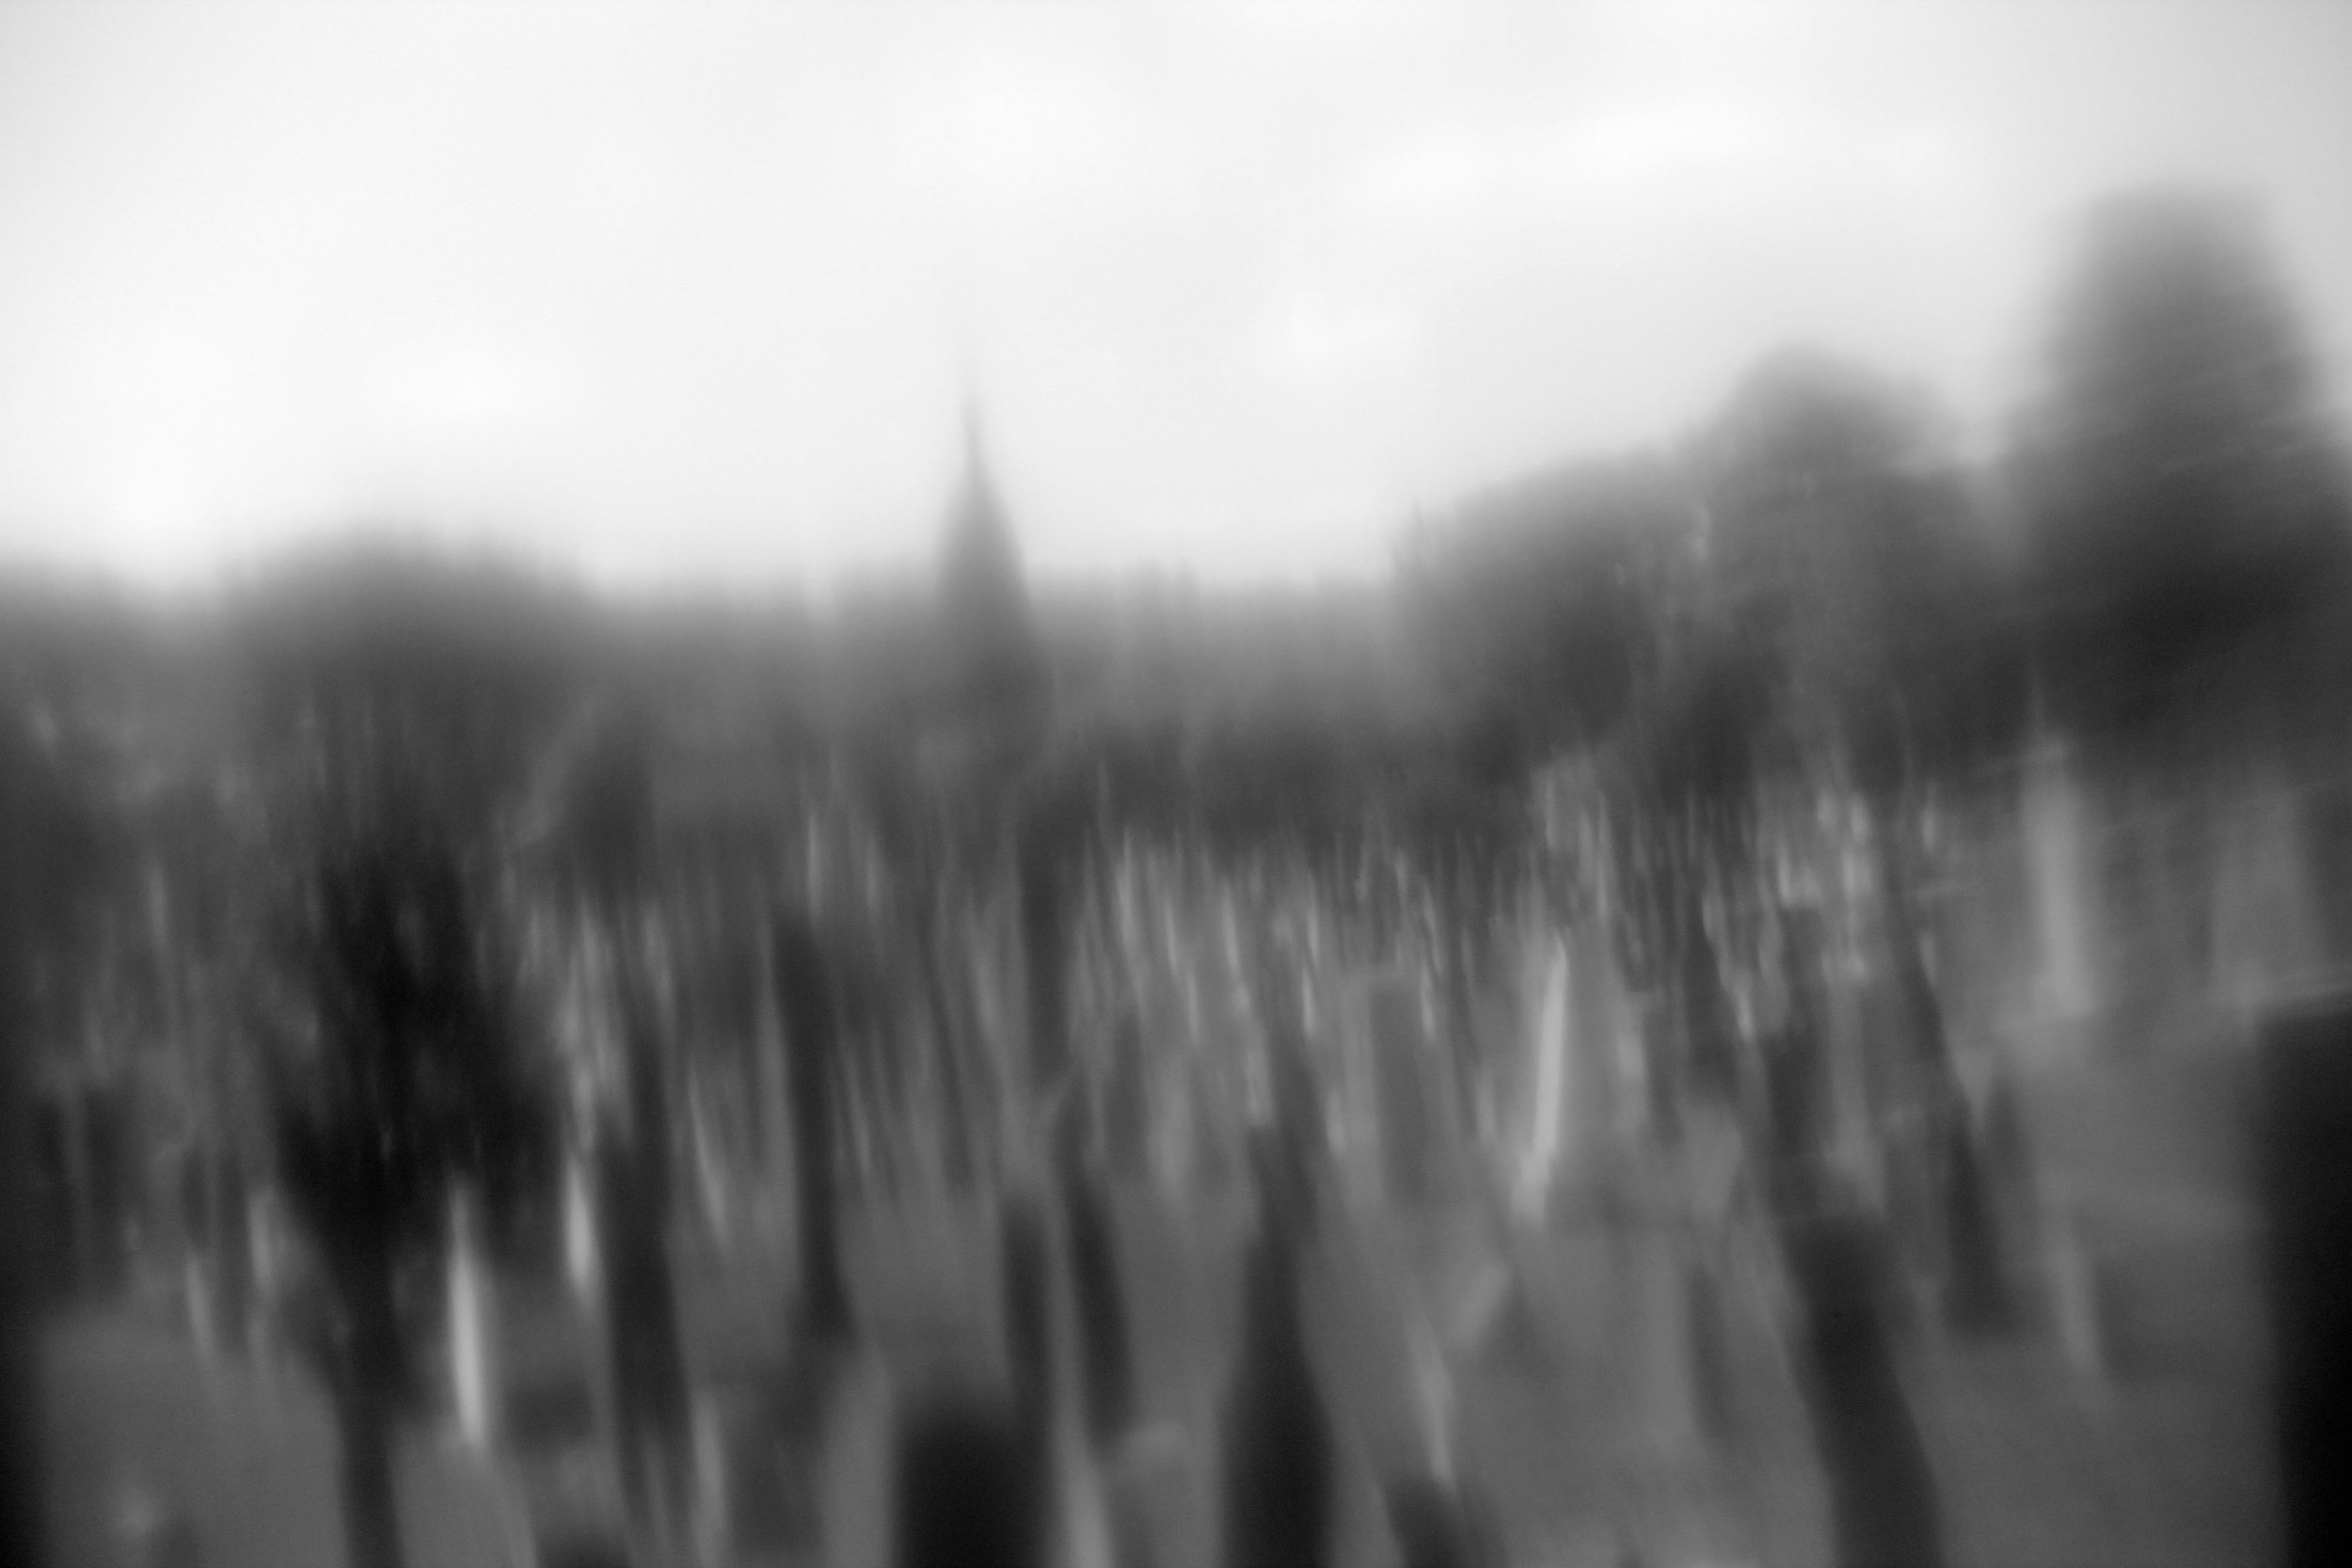  Image captured at the Calgary Cemetery in Queens, NY 2013 while looking through a plastic drinking bottle filter. &nbsp; 